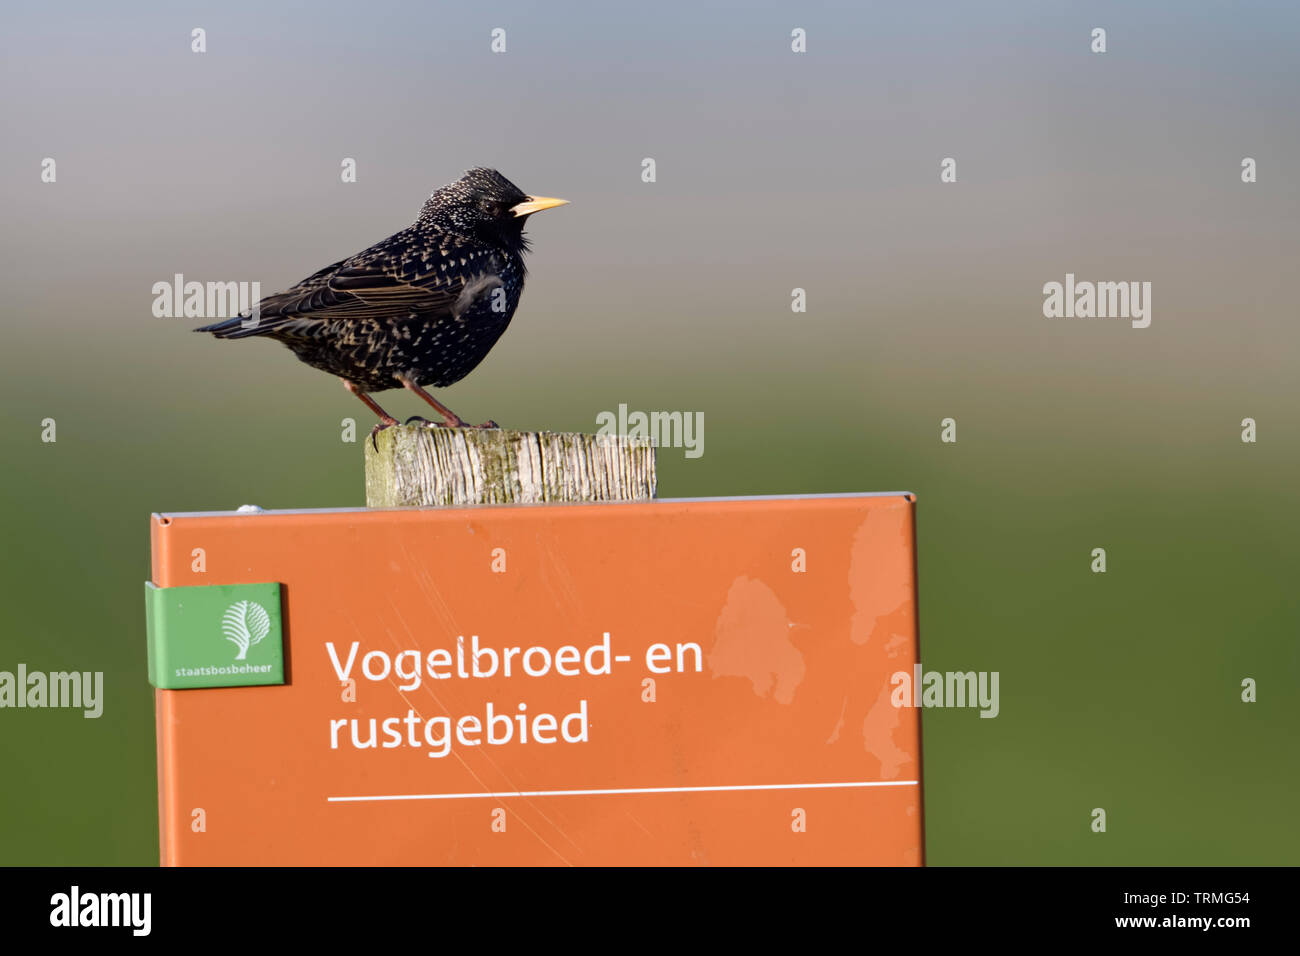 Common Starling / Star ( Sturnus vulgaris ) perched, resting on a sign of dutch staatsbosbeheer, bird conservation, breeding area, resting area, Nethe Stock Photo